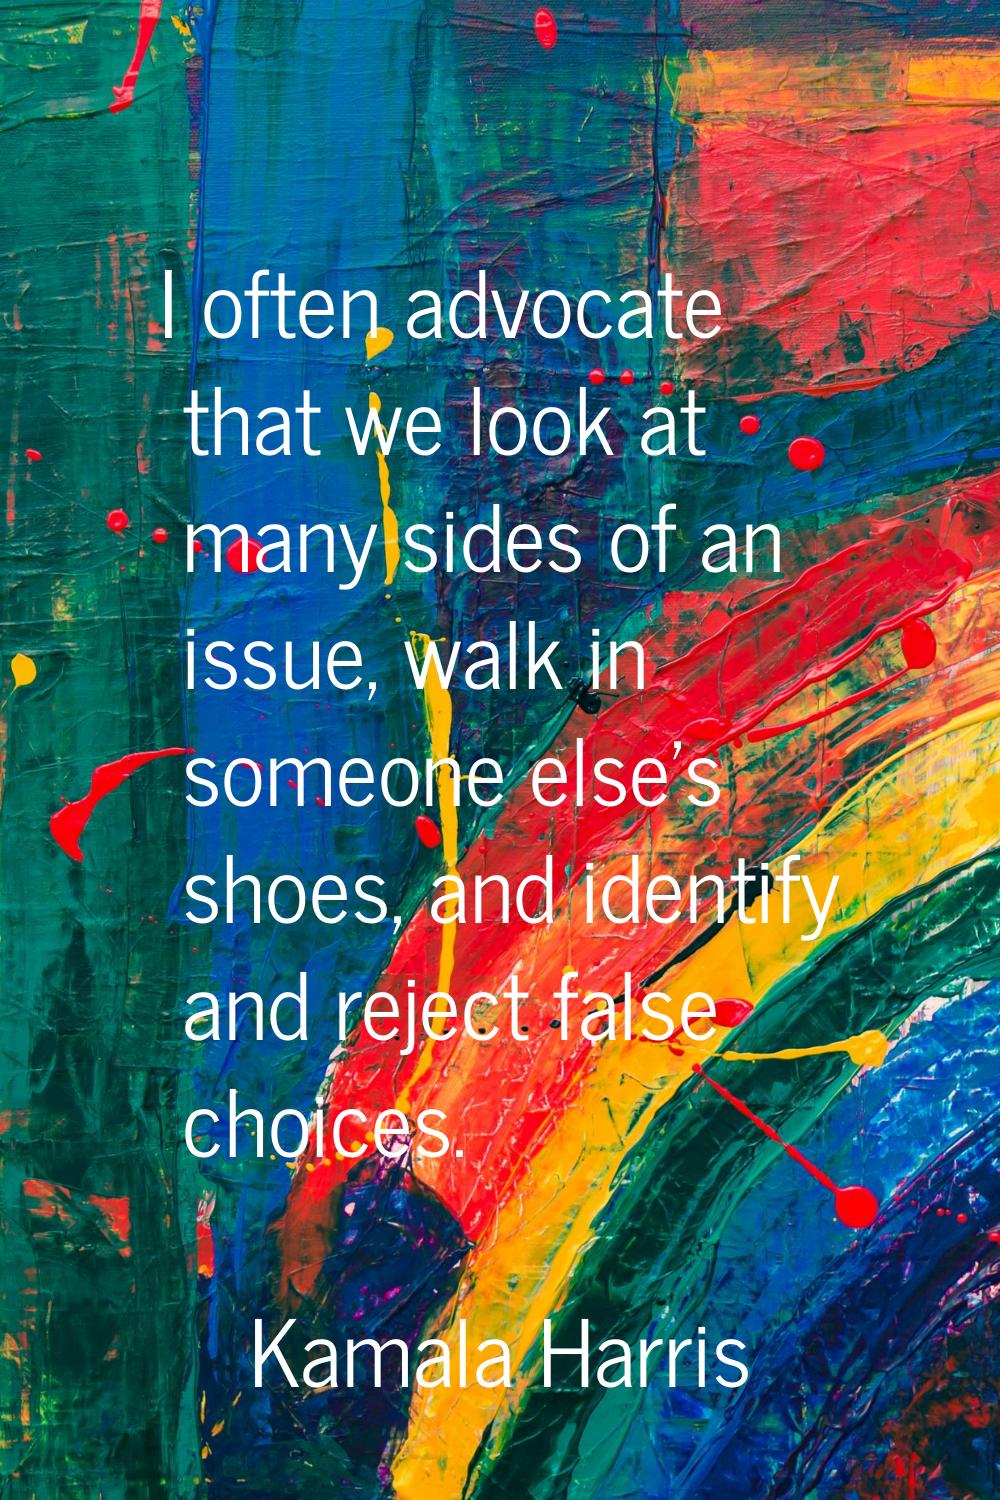 I often advocate that we look at many sides of an issue, walk in someone else's shoes, and identify